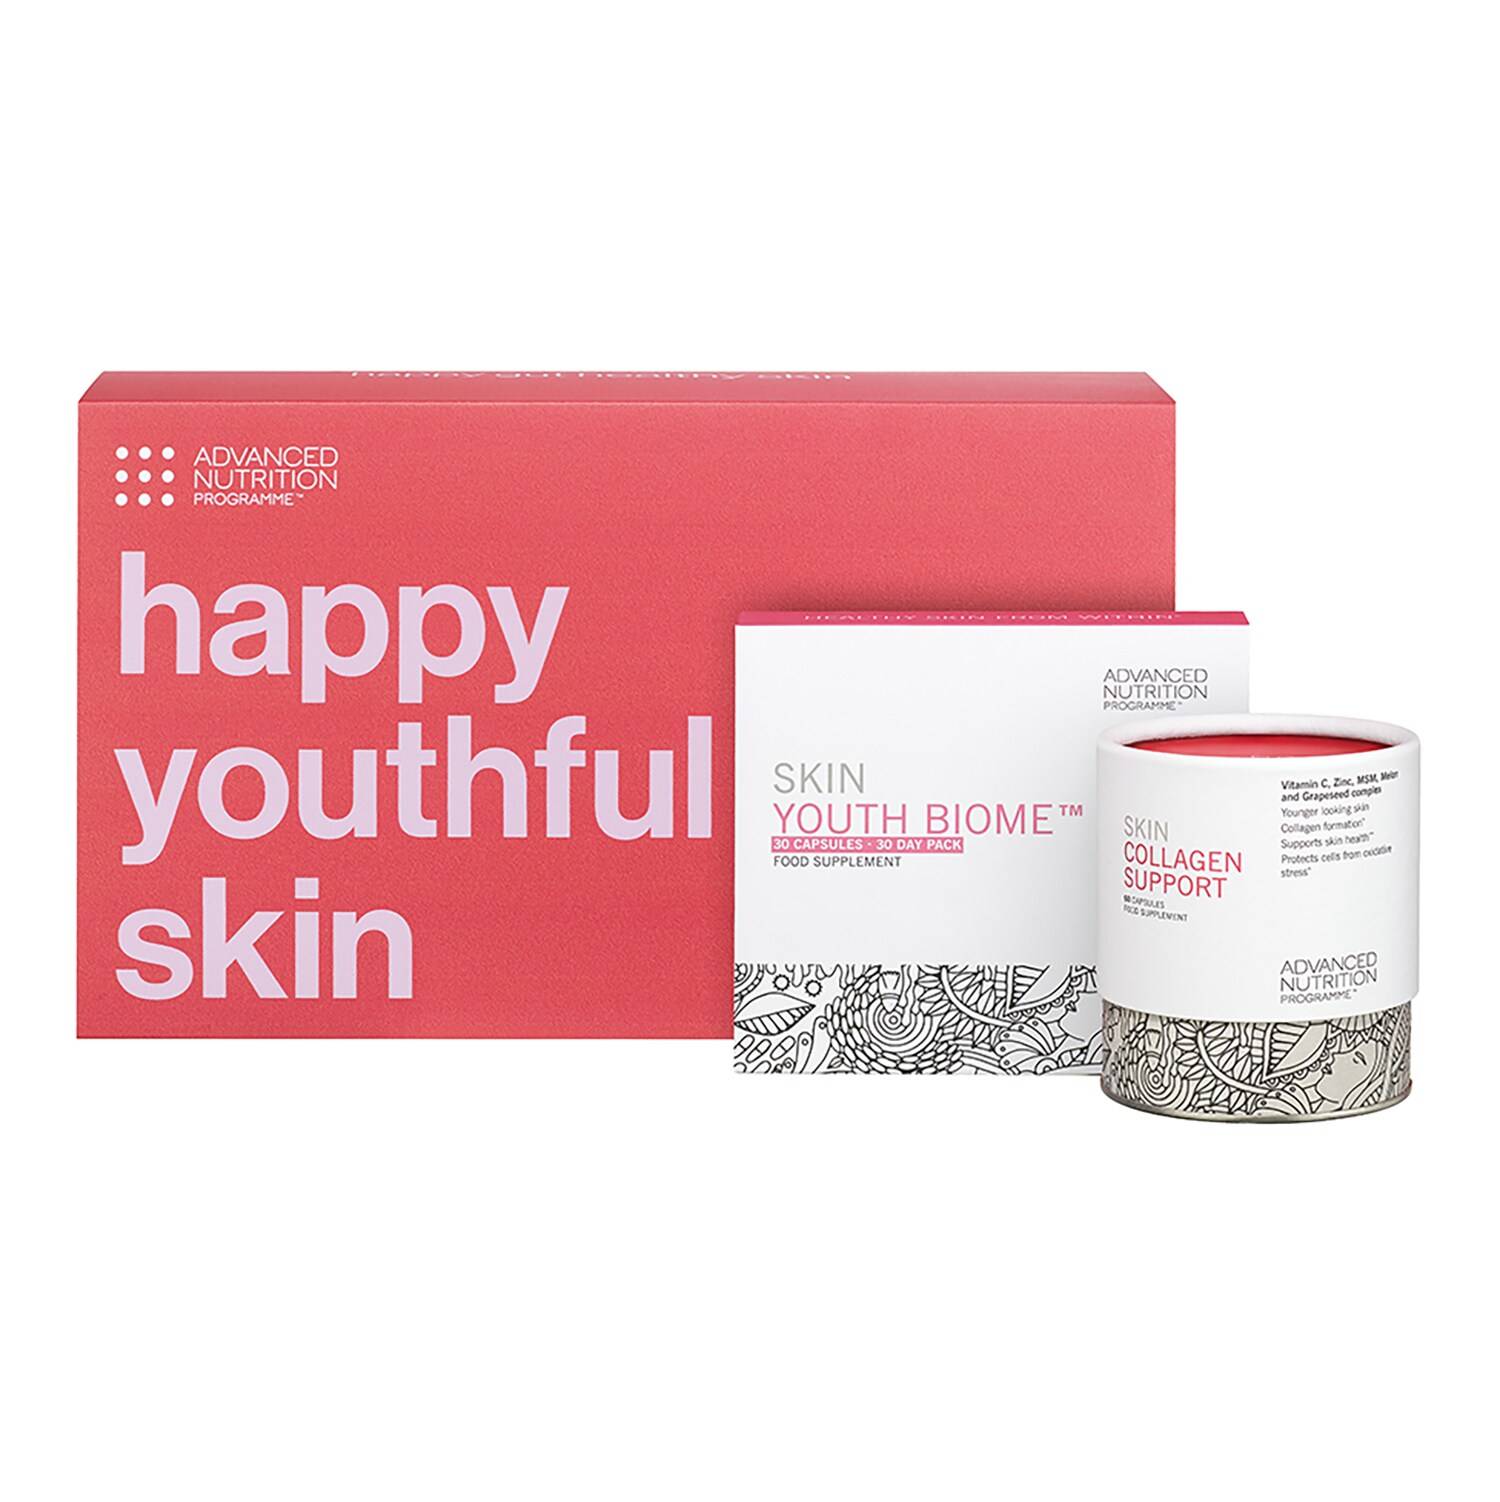 Advanced Nutrition Programme Happy Youthful Skin 90 Capsules